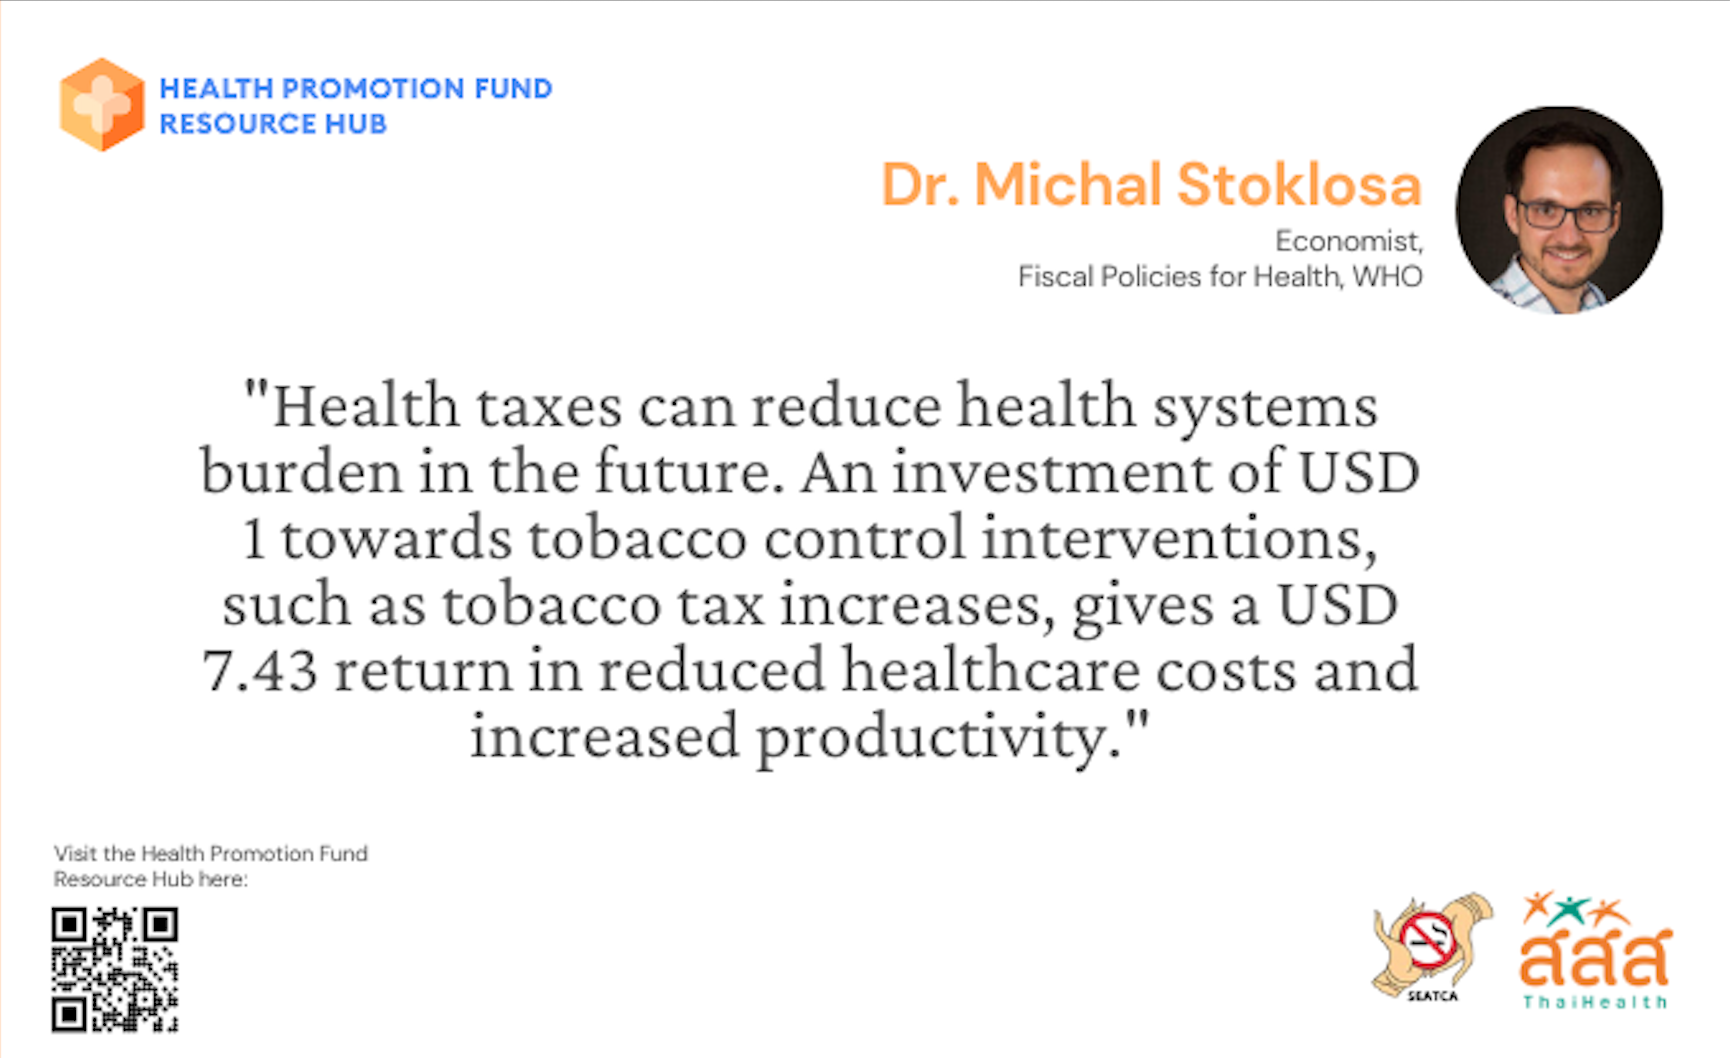 Dr. Michal Stoklosa, Economist, Fiscal Policies for Health, WHO